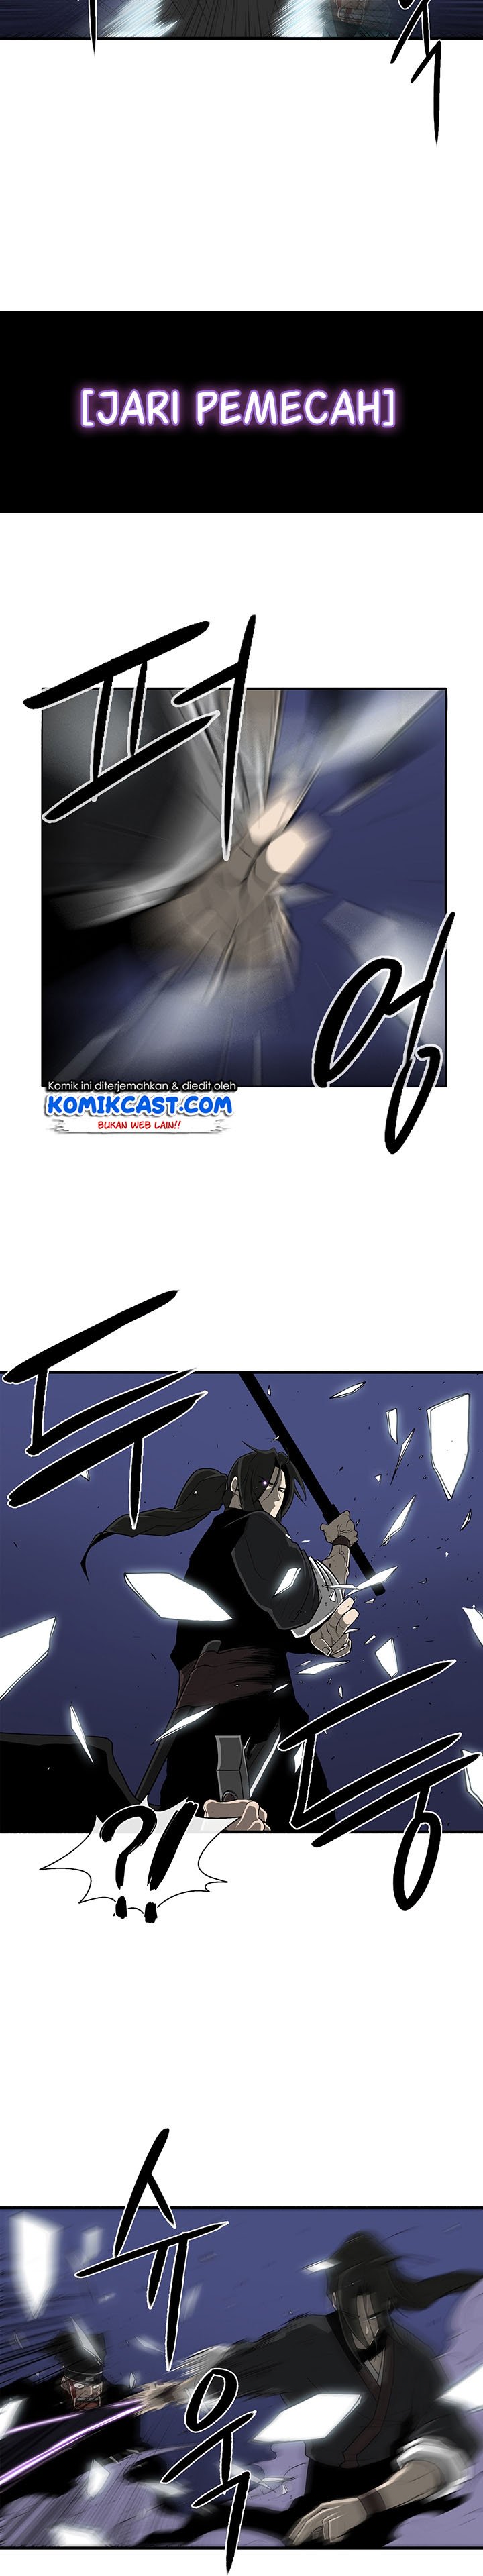 Legend of the Northern Blade Chapter 24